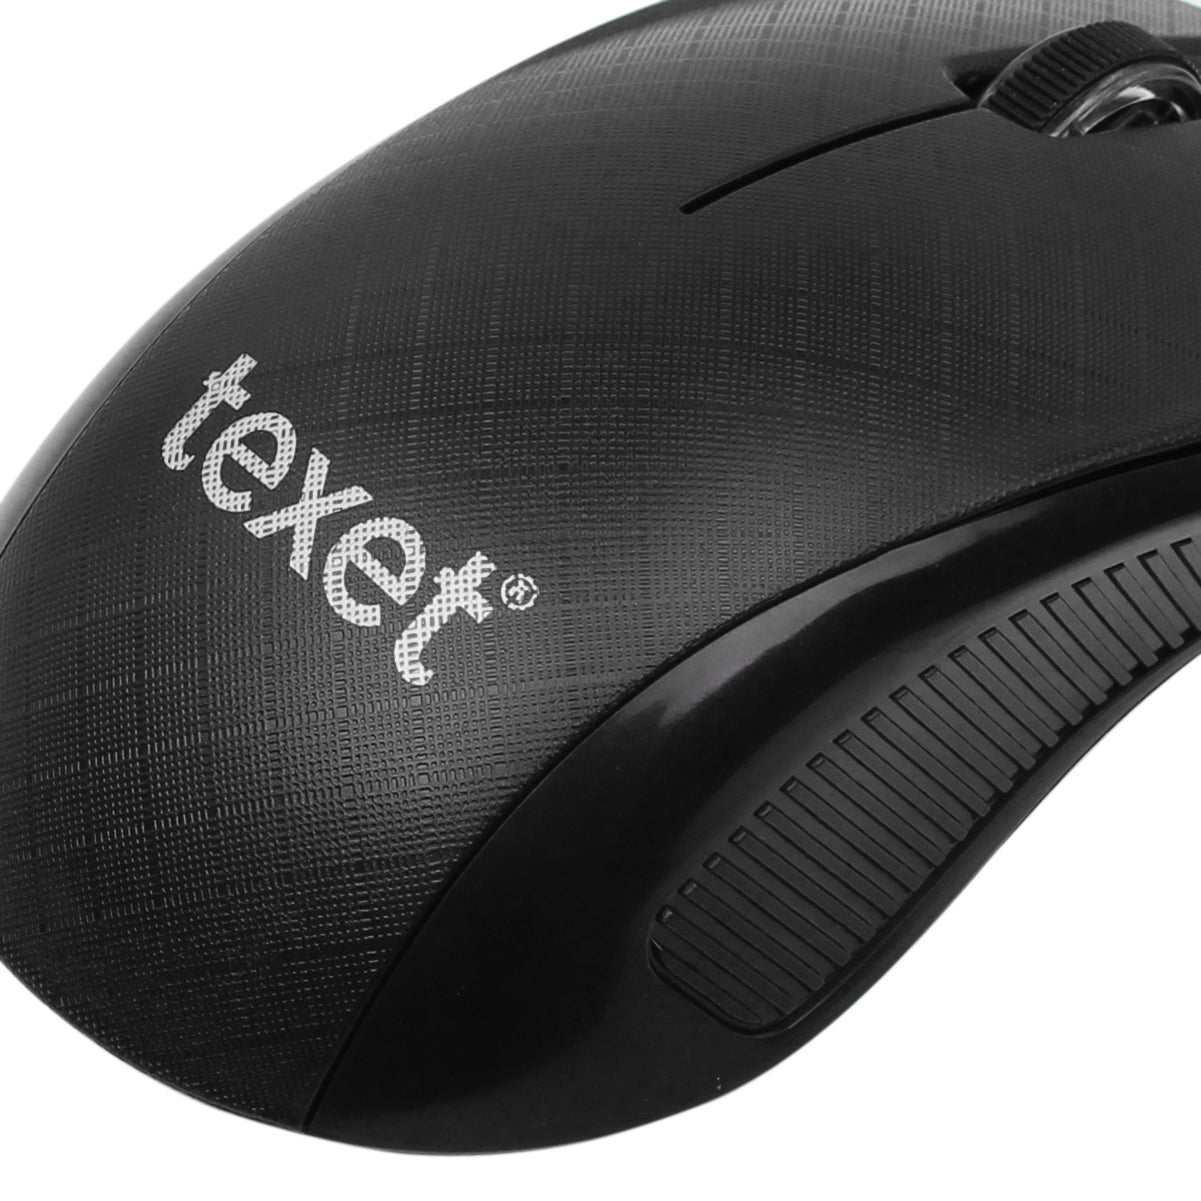 TEXET Wired Keyboard Mouse Combo